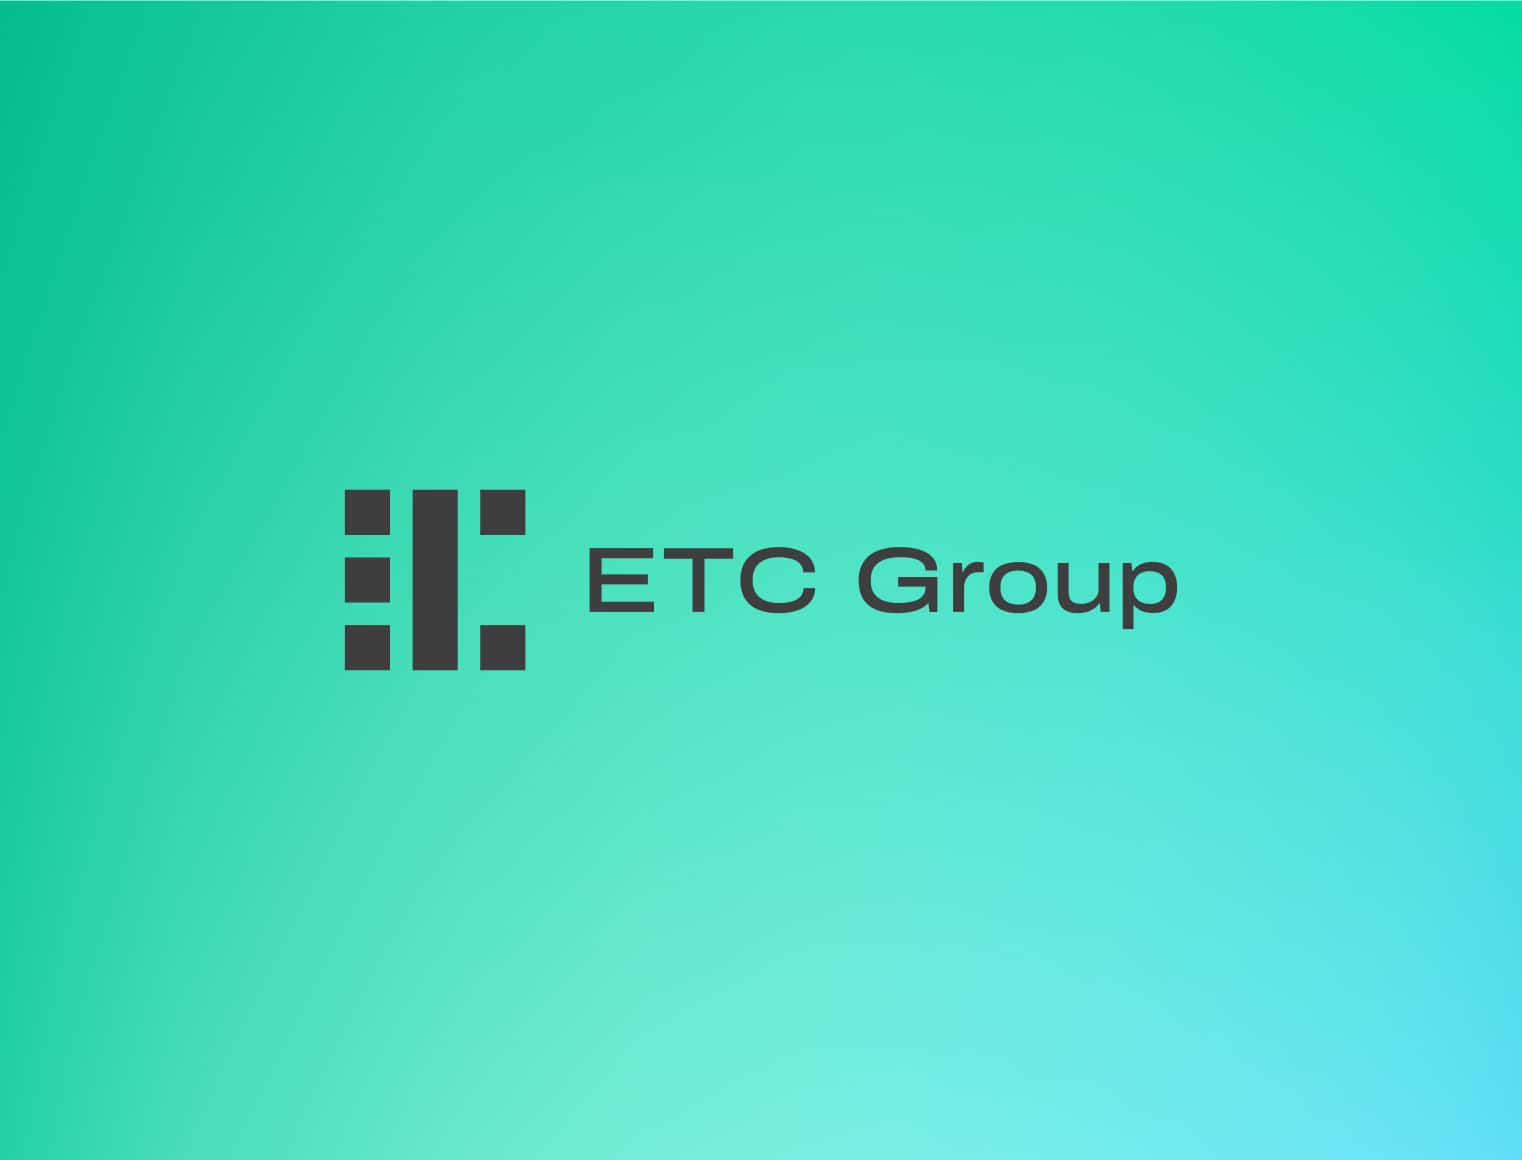 ETC Group Launches Bitcoin Cash ETC To Satisfy Professional Investor Demand for Digital Asset Products